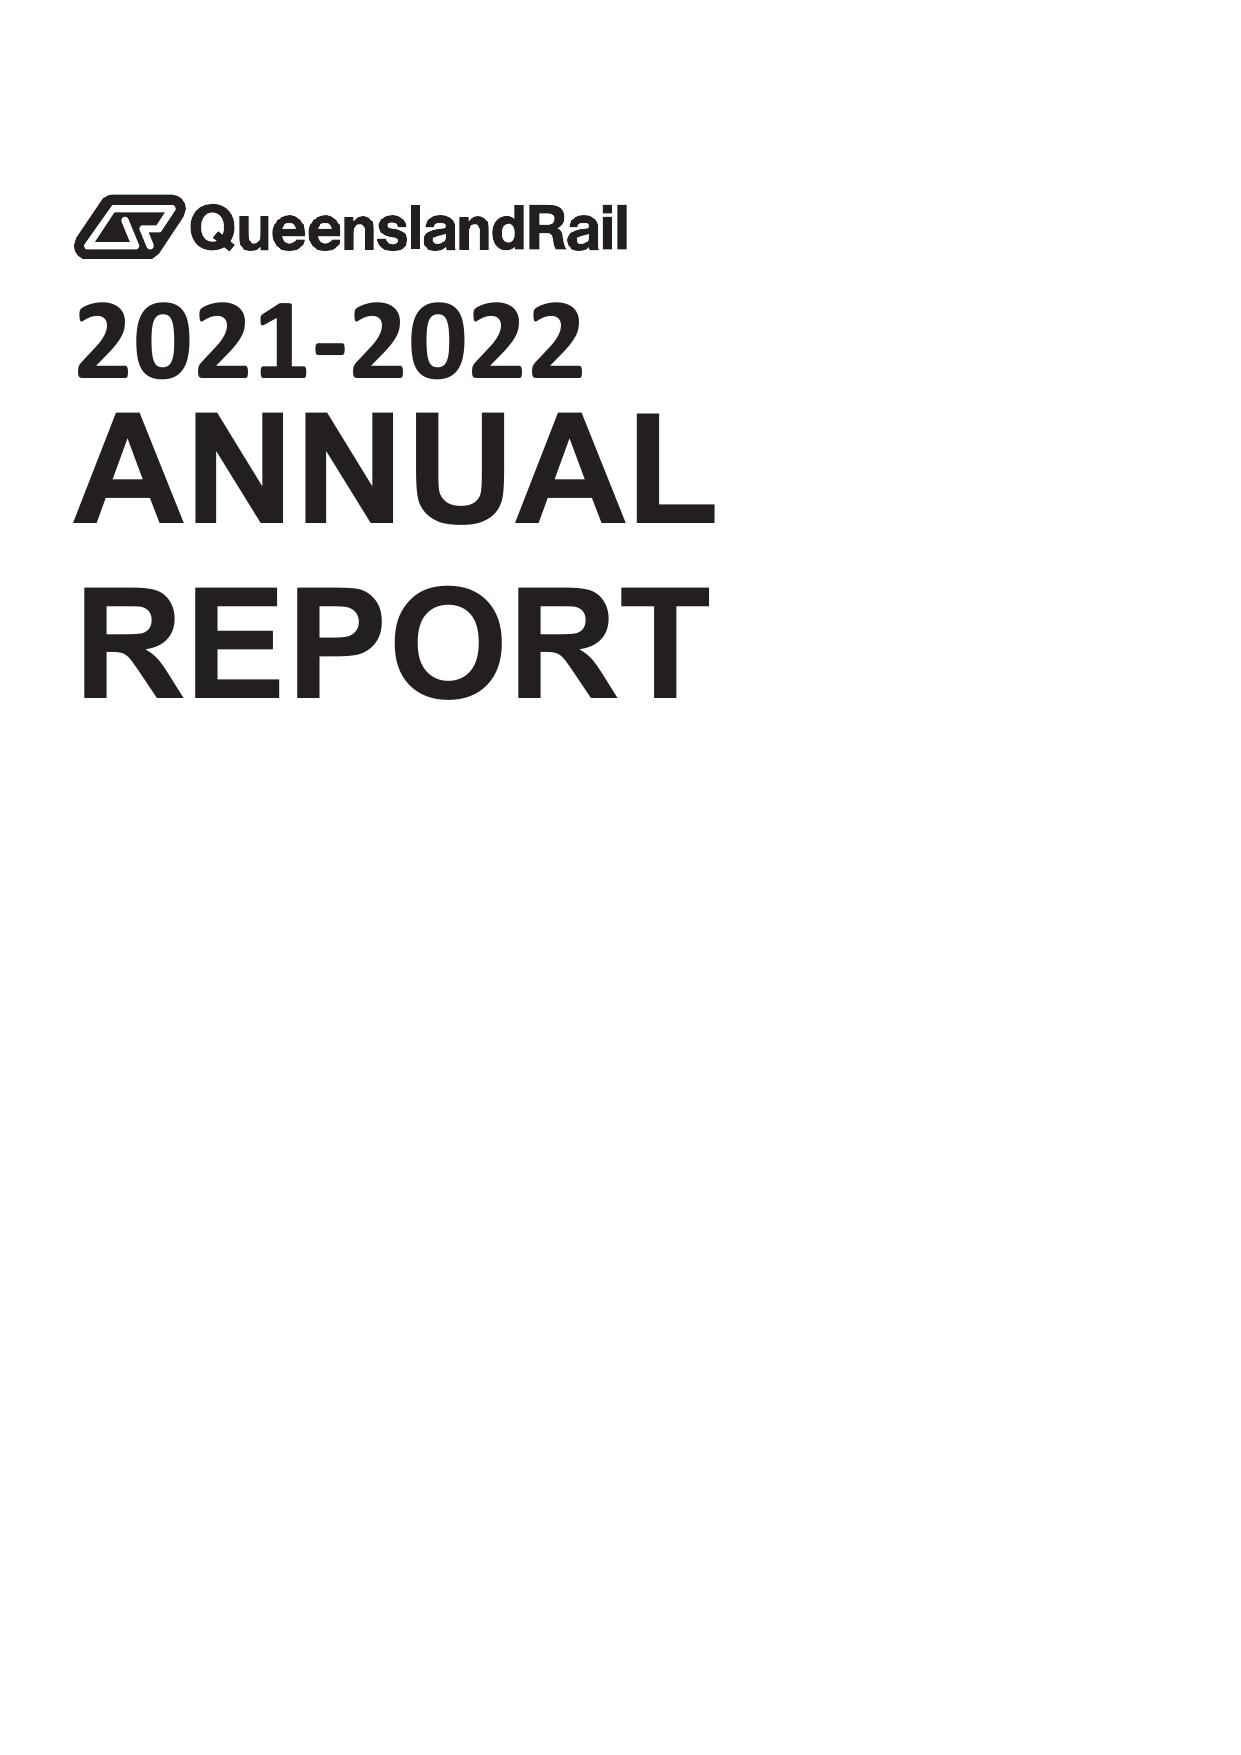 FORTYSOUTH 2021 Annual Report